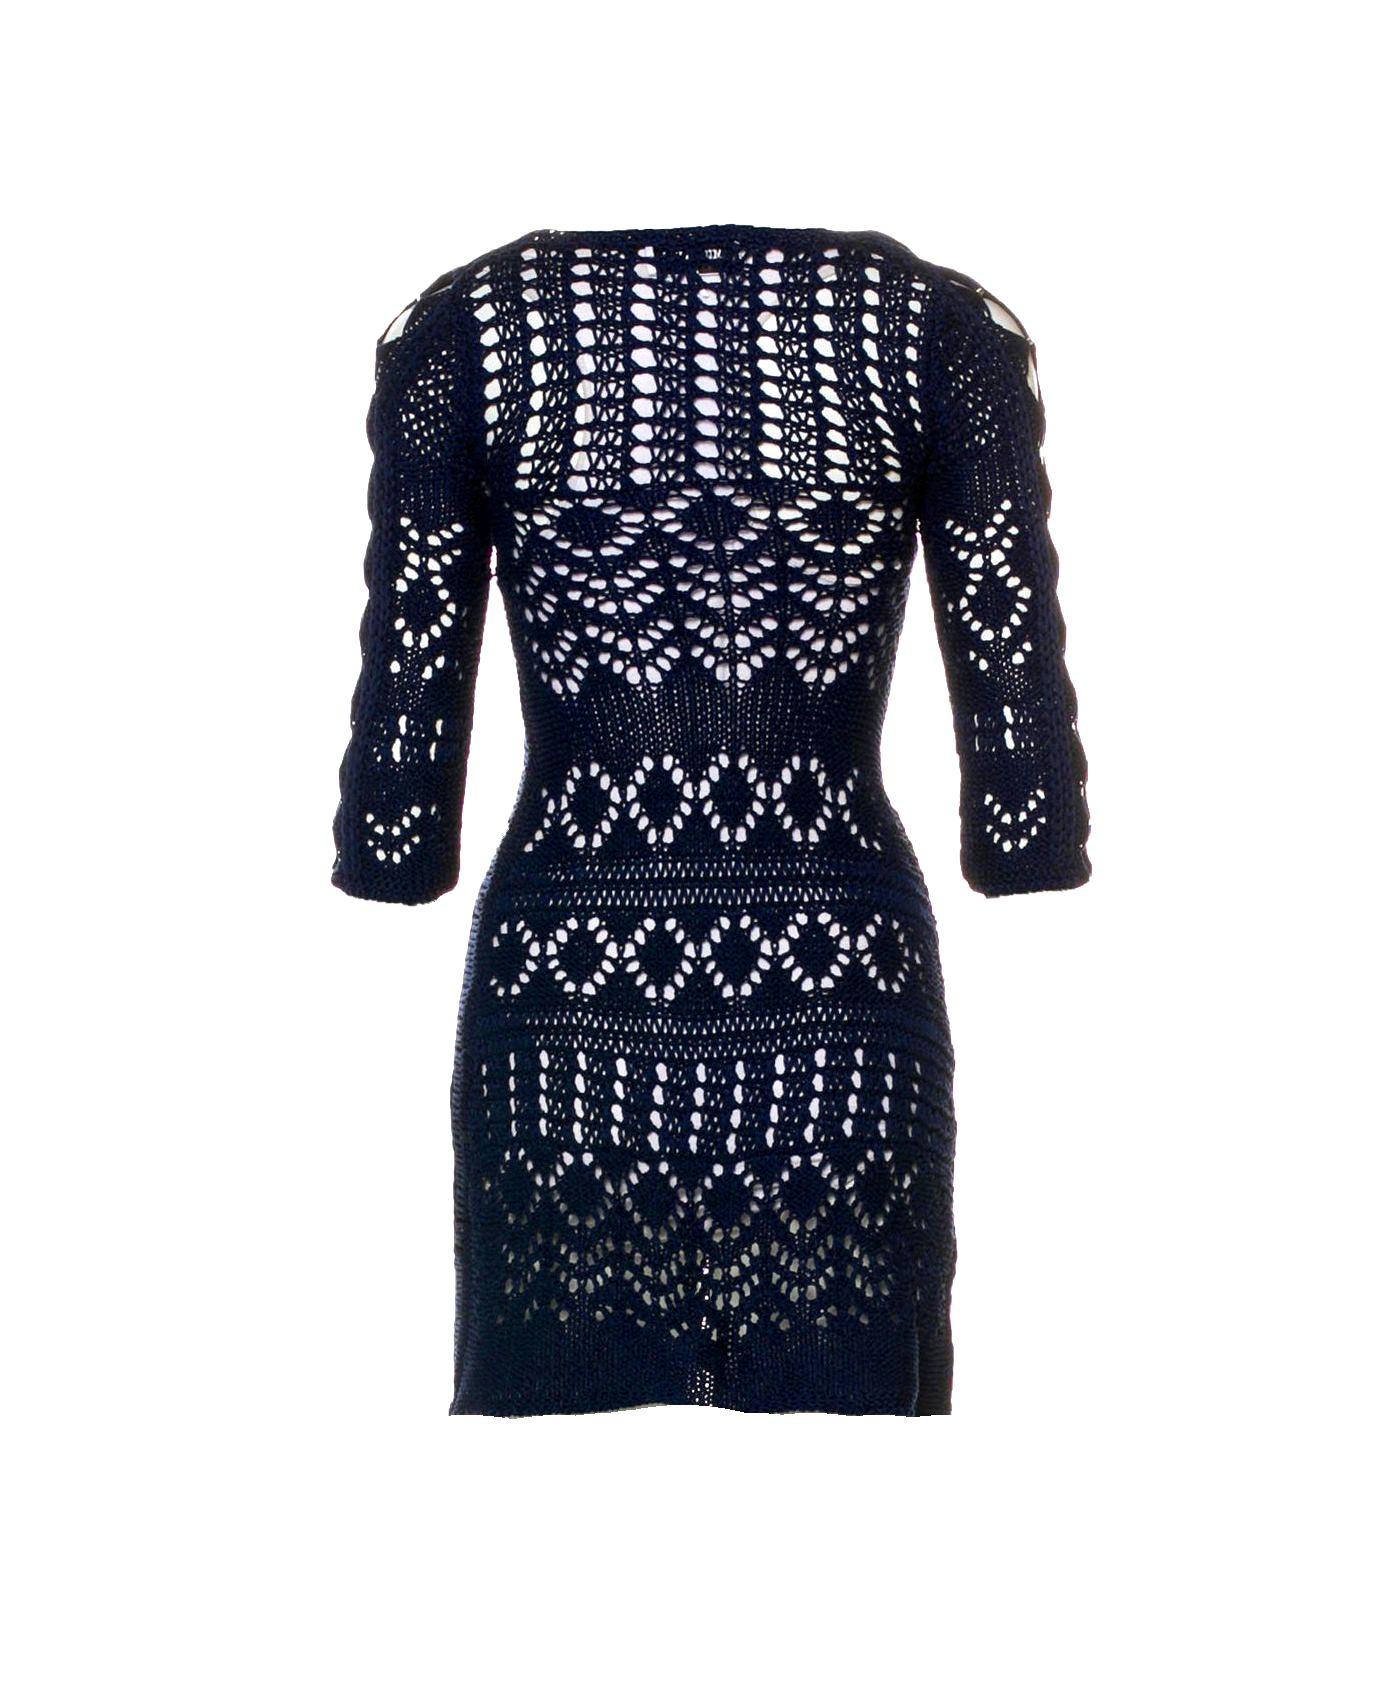 
    Beautiful Emilio Pucci Mini Dress
    3/4 sleeves with decorative hardware pins
    Midnight blue color
    Simply slips on
    Slim fit
    Made in Italy
Size 42
Retails for 1499$ plus taxes

The AD pictures are for style reference only.